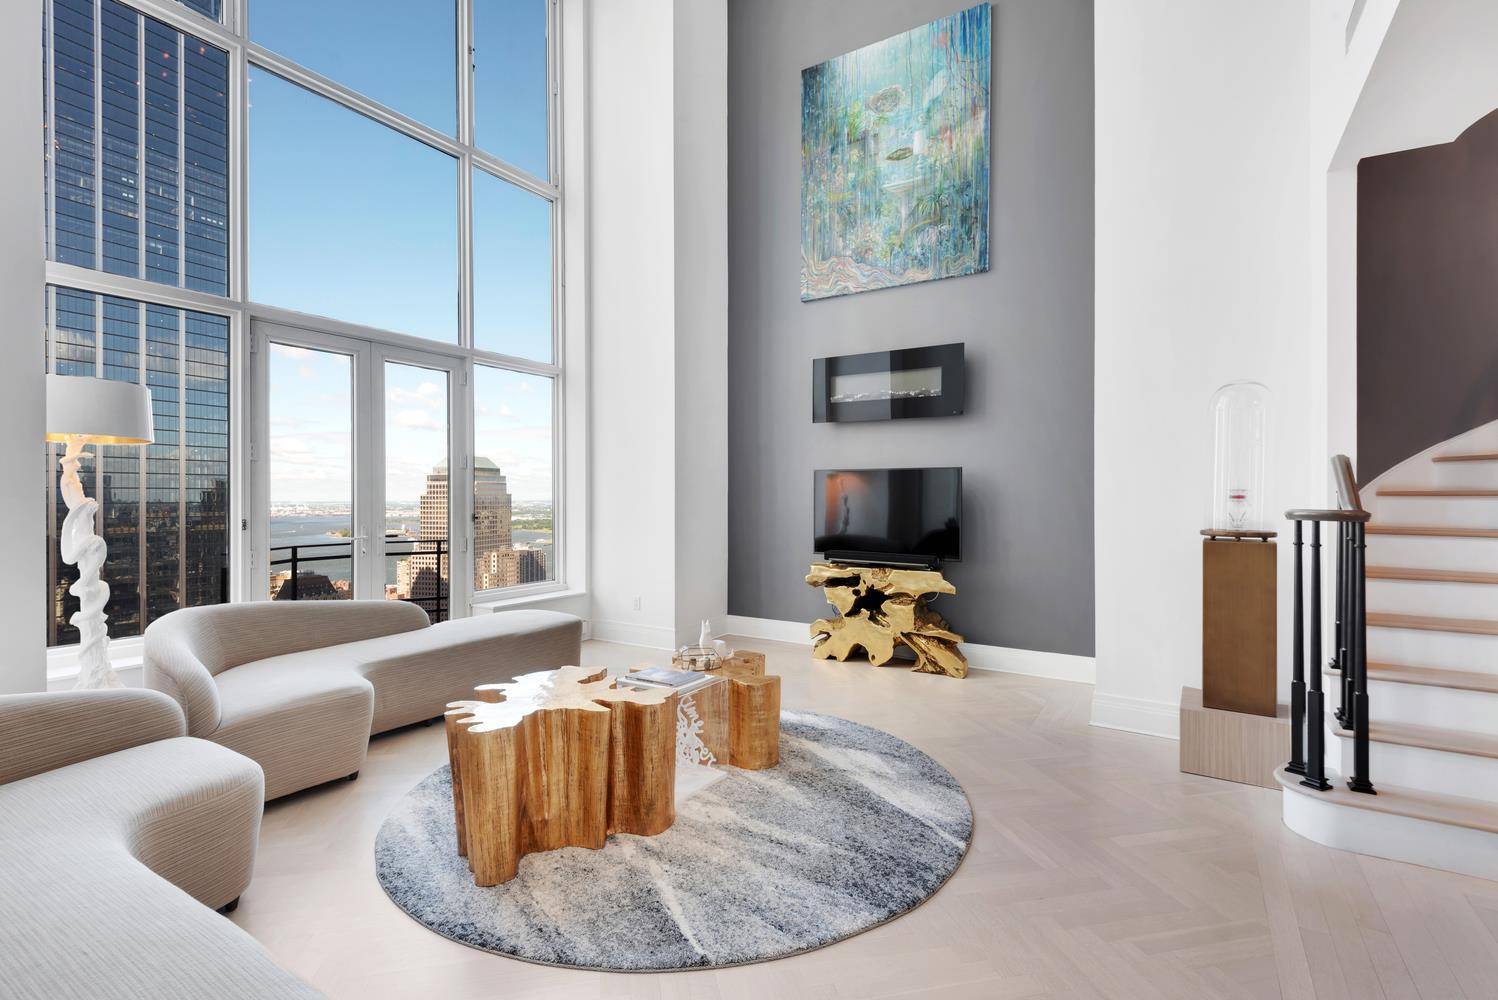 Rare highest duplex apartment at 30 Park Place, first of its kind available for resale.